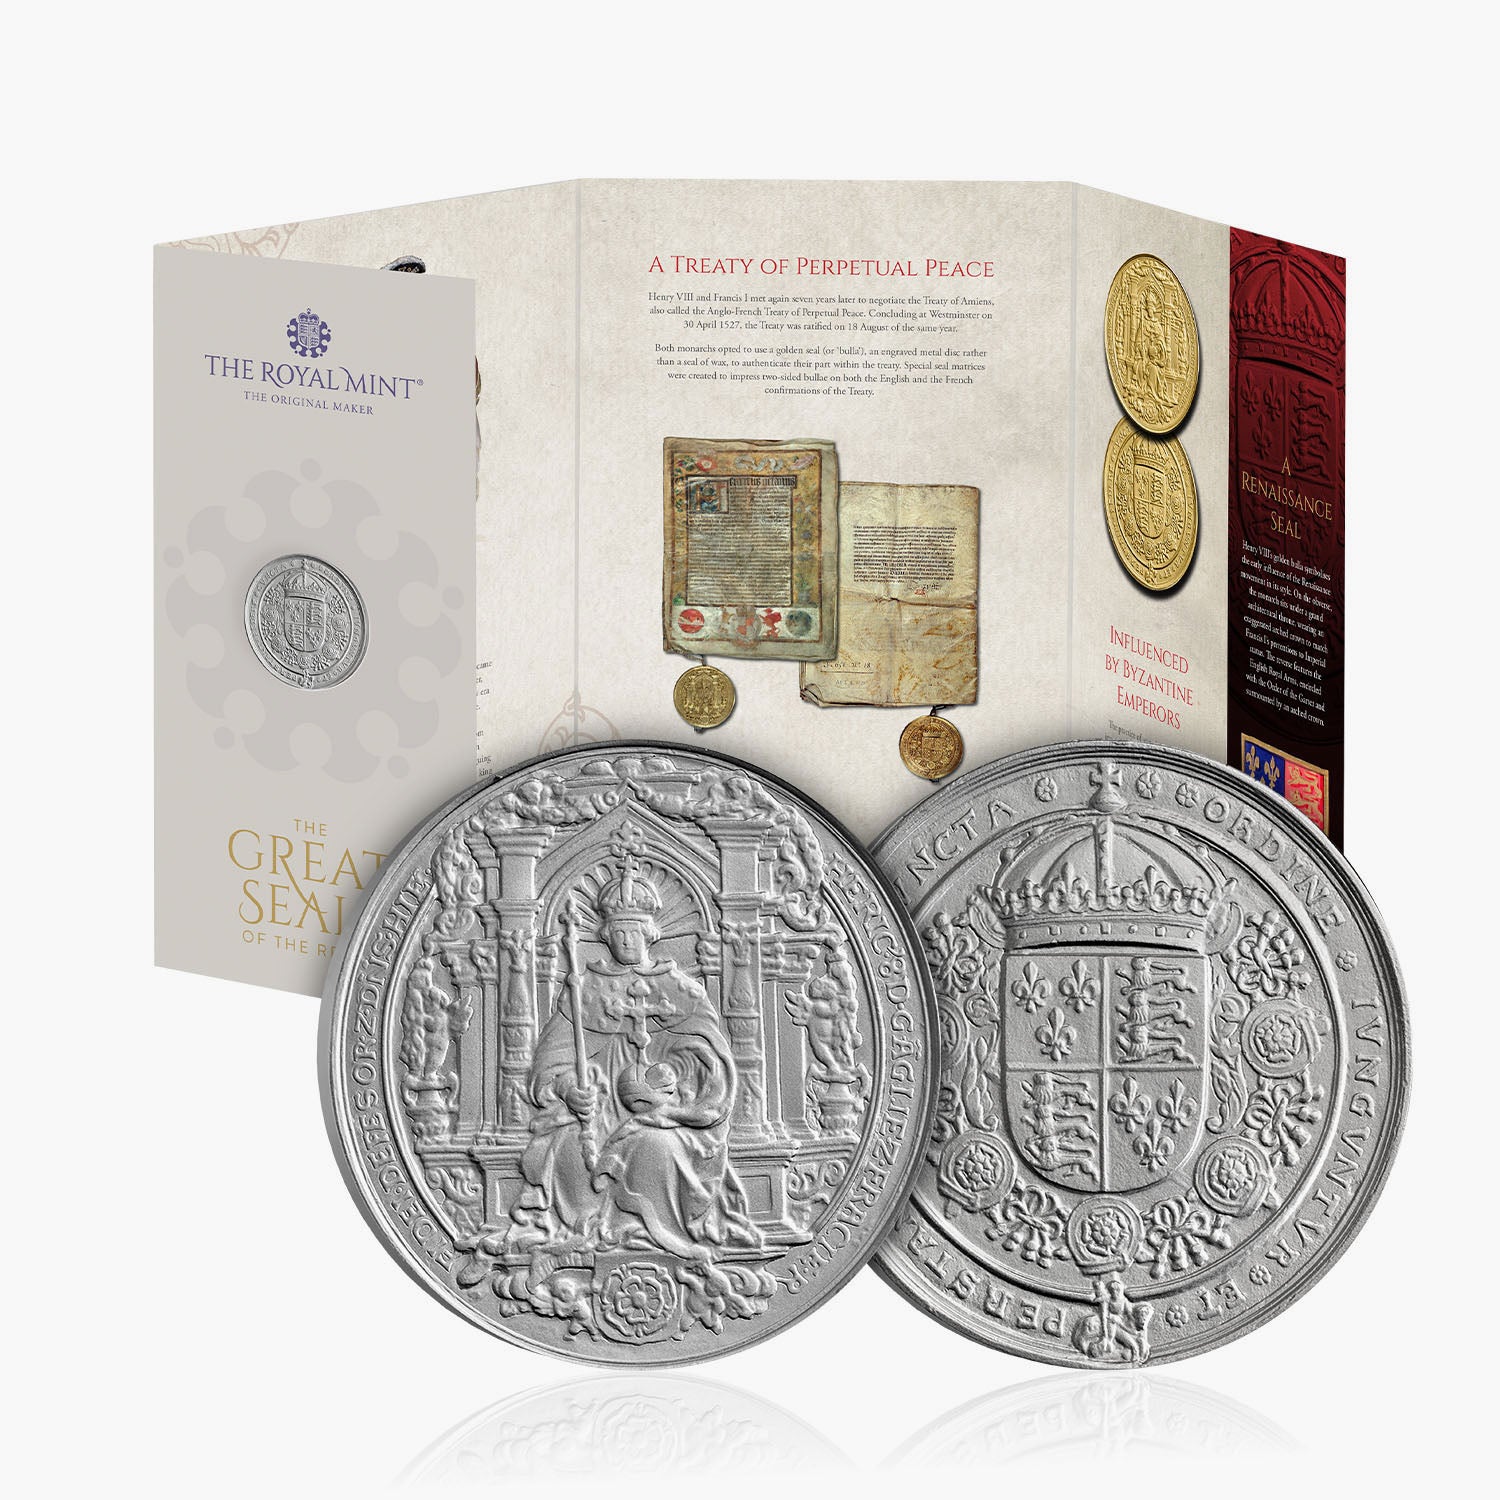 The Great Seals of the Realm - King Henry VIII BU